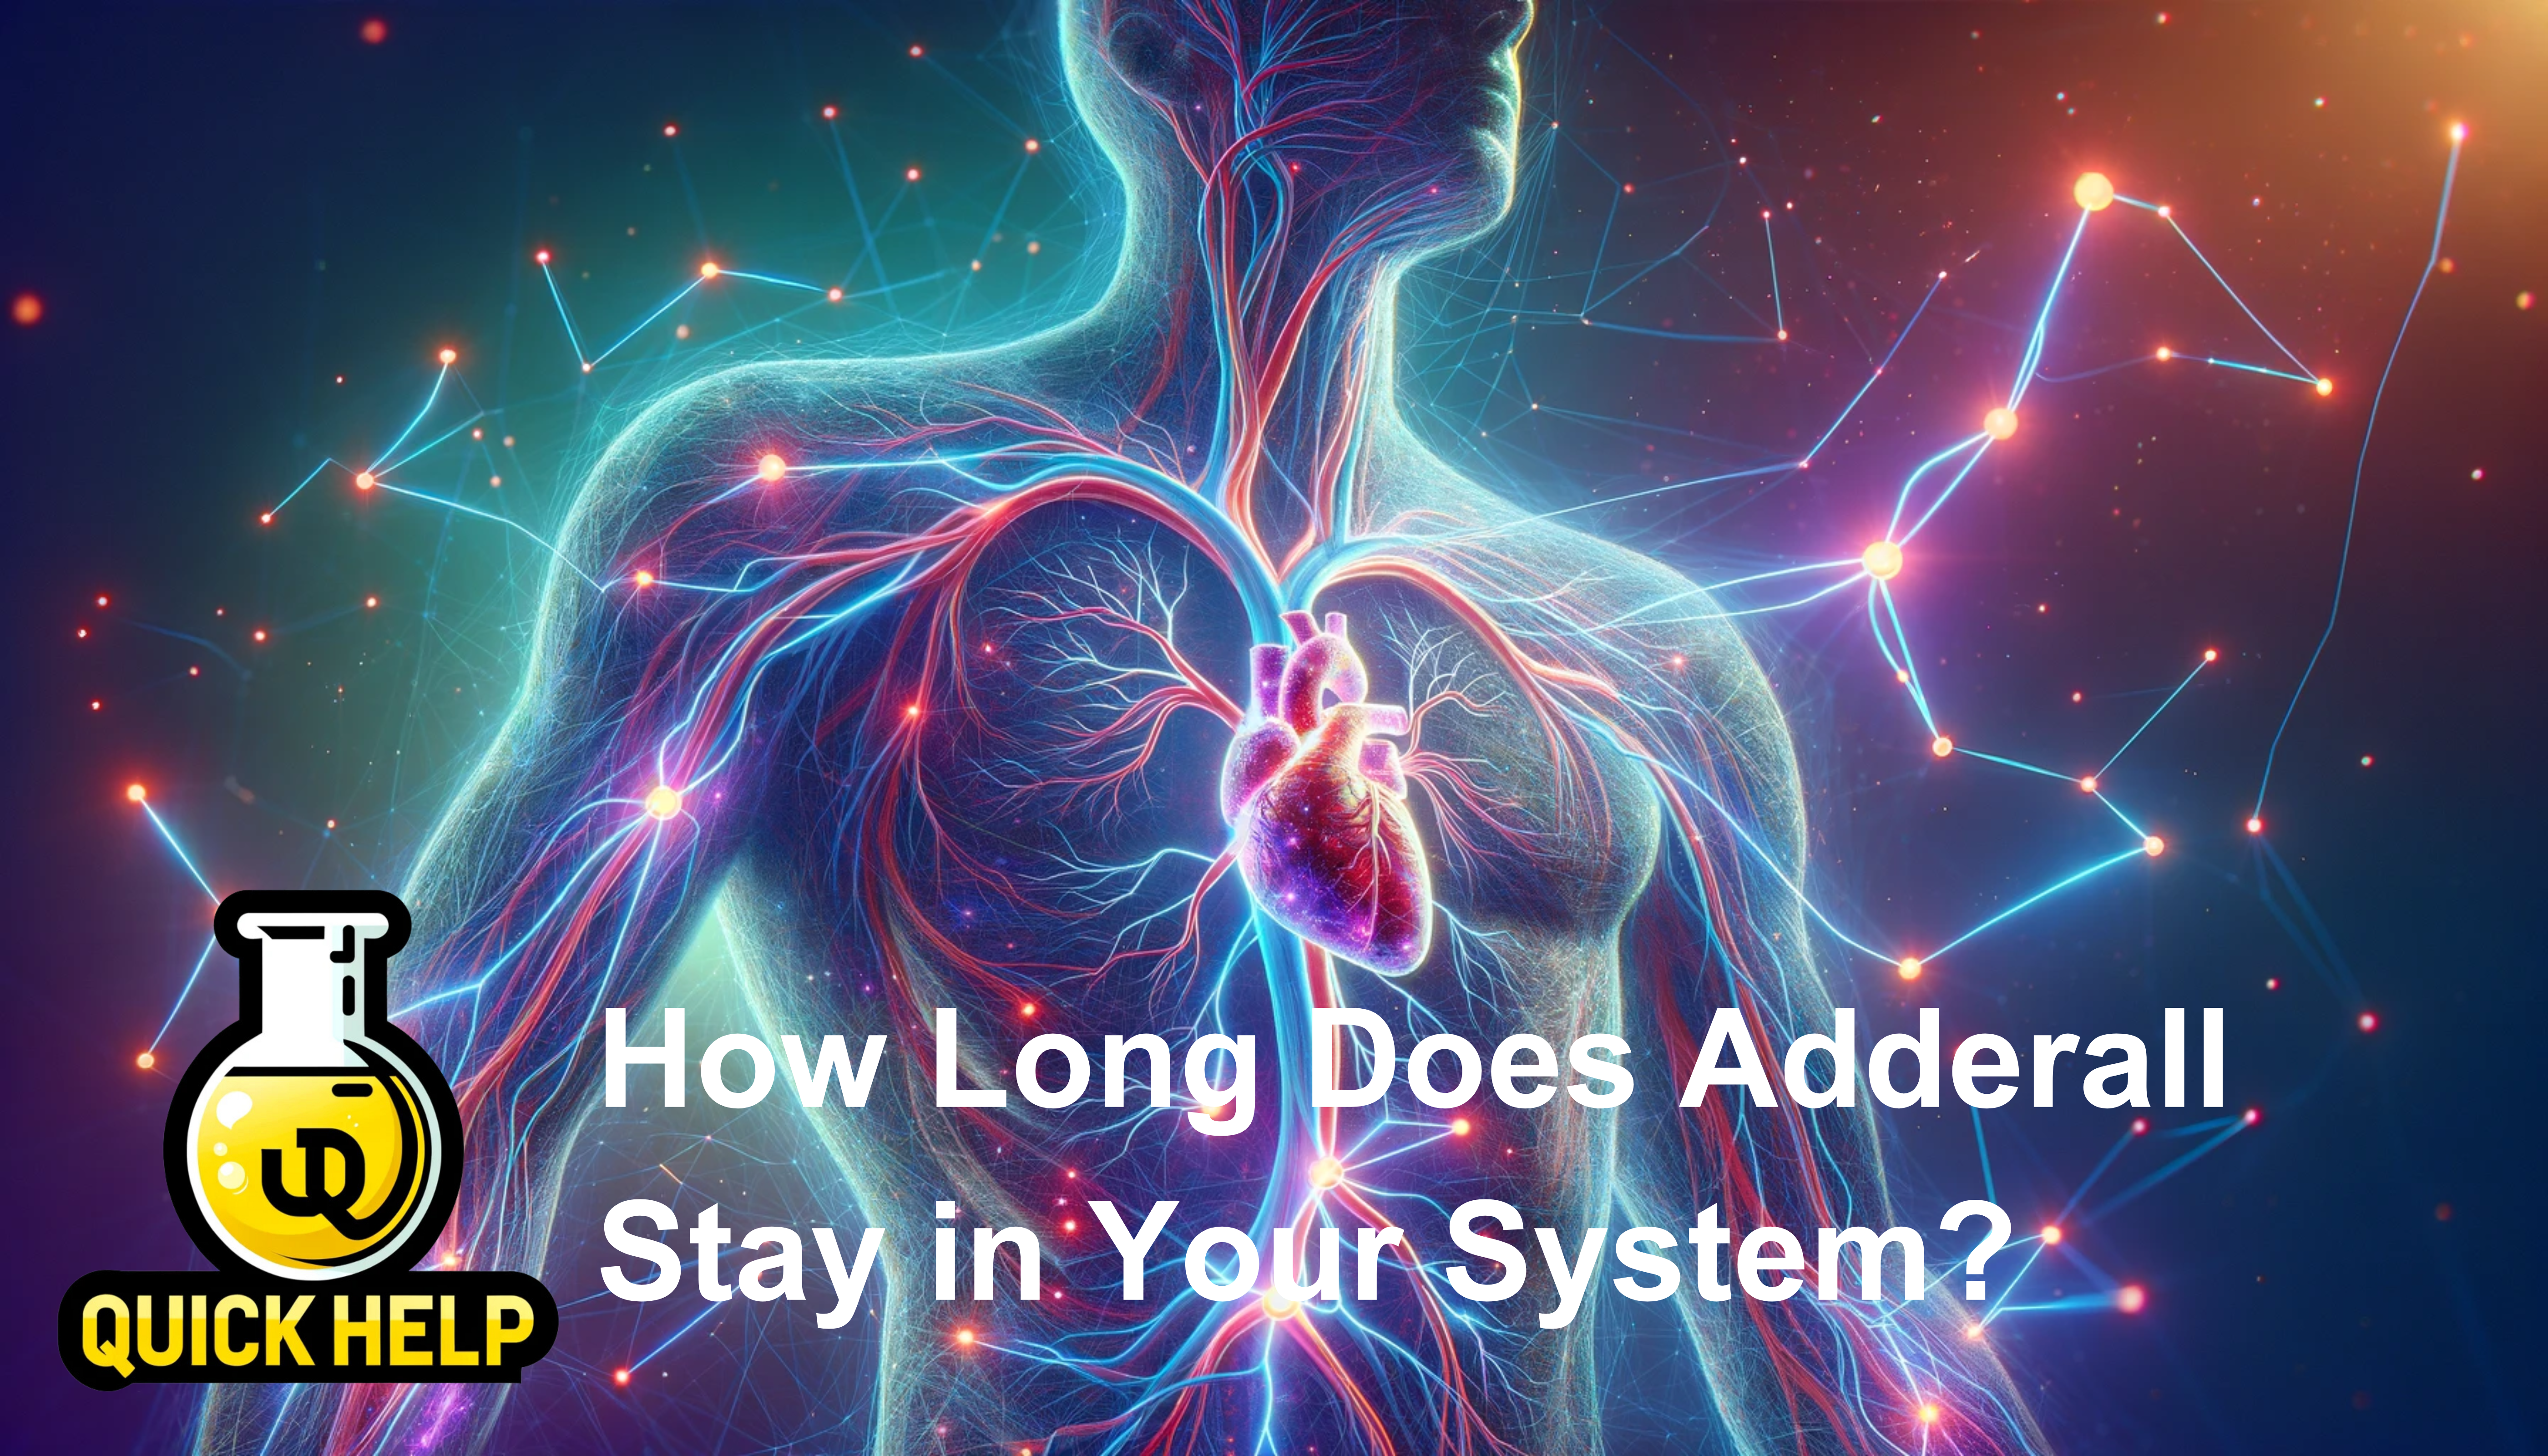 How Long Does Adderall Stay in Your System? (Urine)